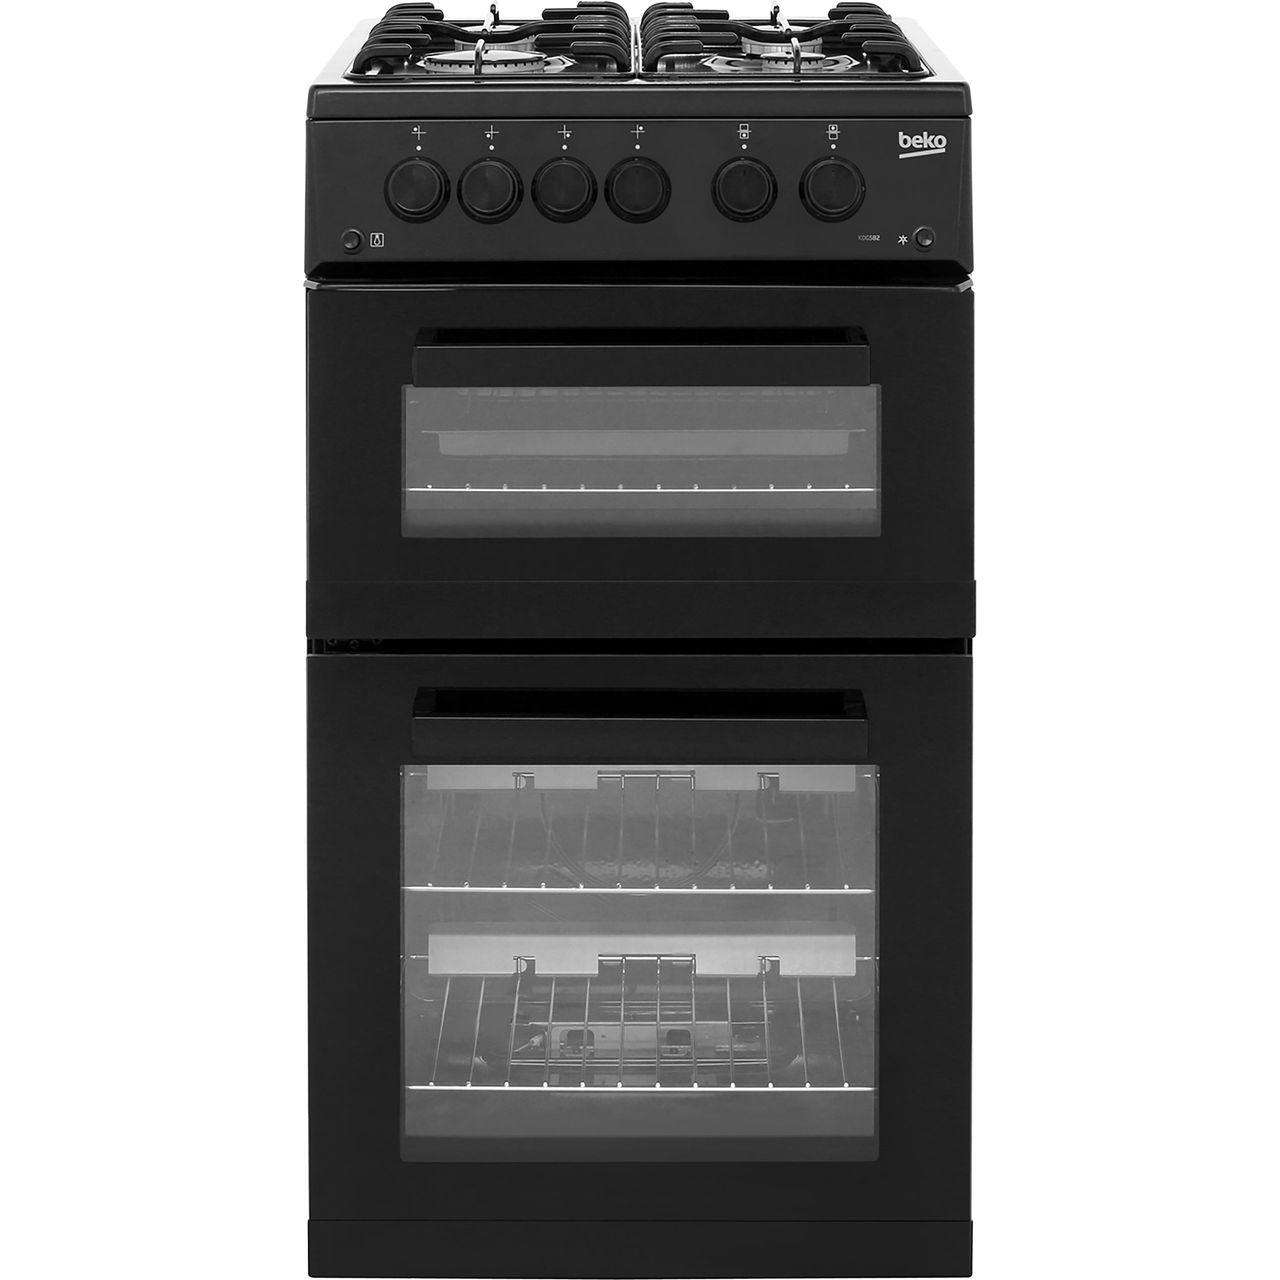 Beko KDG582K 50cm Gas Cooker with Full Width Gas Grill Review